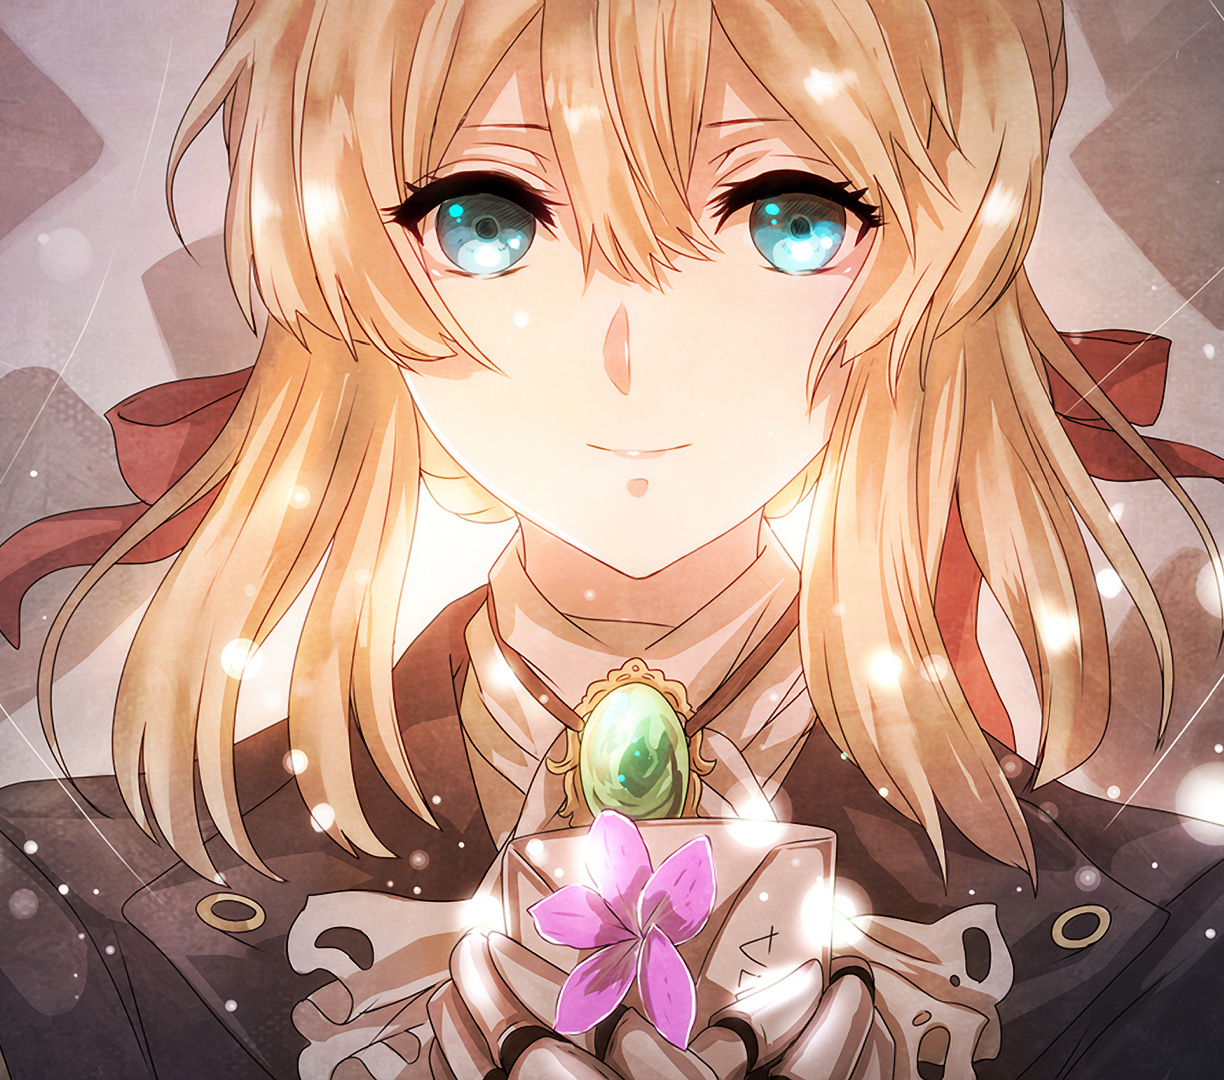 Blonde and beautiful, anime, violet evergarden wallpaper, HD image, picture, background, 041e4f